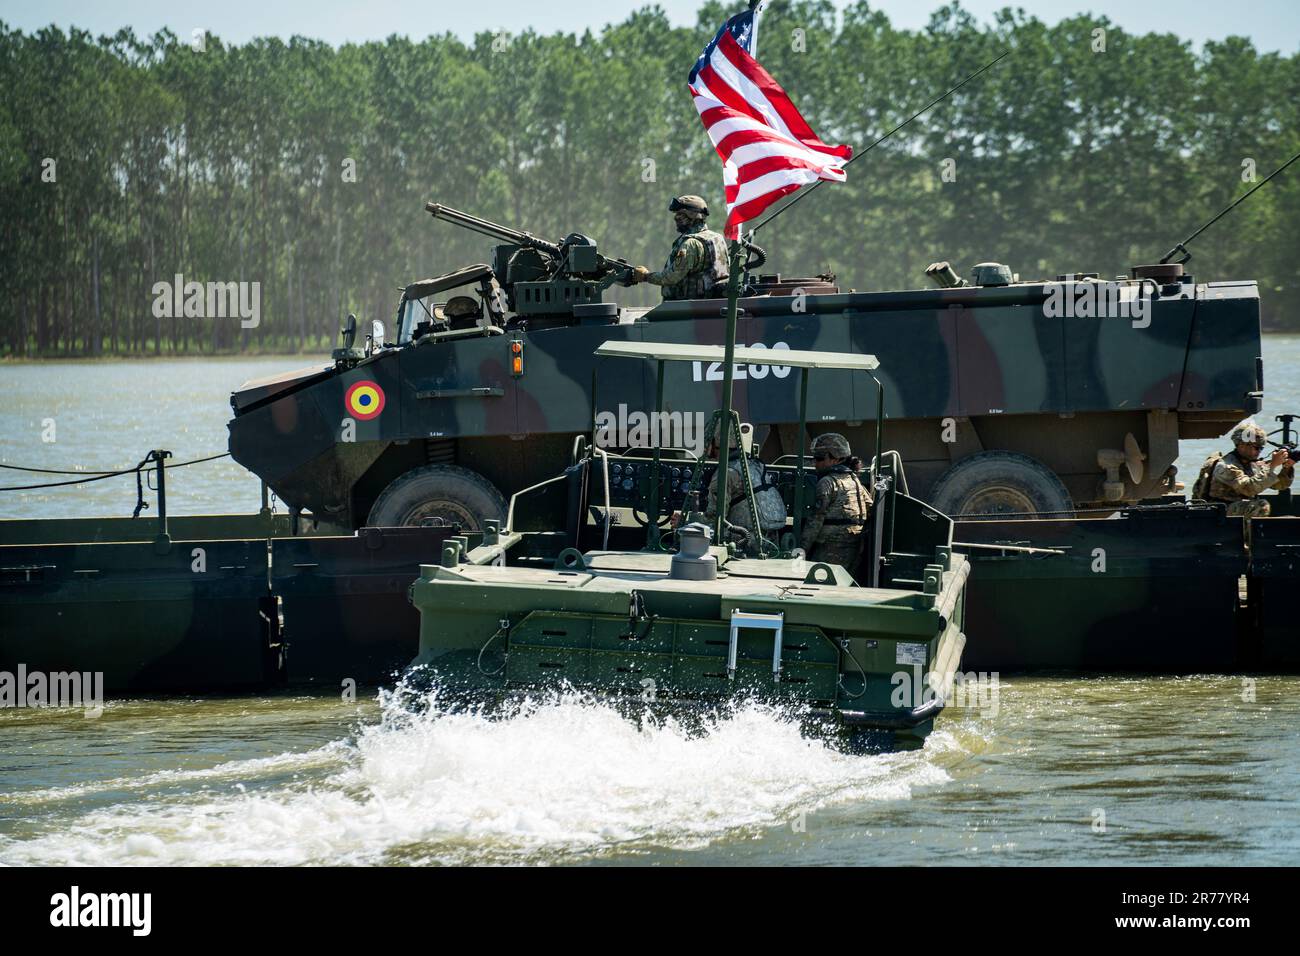 June 6, 2023 - Romania - U.S. Army boats assigned to the 50th Multi-role Bridge Company, 5th Engineer Battalion, ferry a Romanian Piranha III Armored Personnel Carrier across the Danube River near Bordusani, Romania, during the wet gap crossing exercise of Saber Guardian 23, June 6, 2023. The exercise is a component of DEFENDER 23, co-led by Romanian Land Forces and the U.S. Army at various locations in Romania to improve the integration of multinational combat forces by engaging in events such as vehicle road marches, medical training exercises and river crossings. (Credit Image: © U.S. Army/ Stock Photo